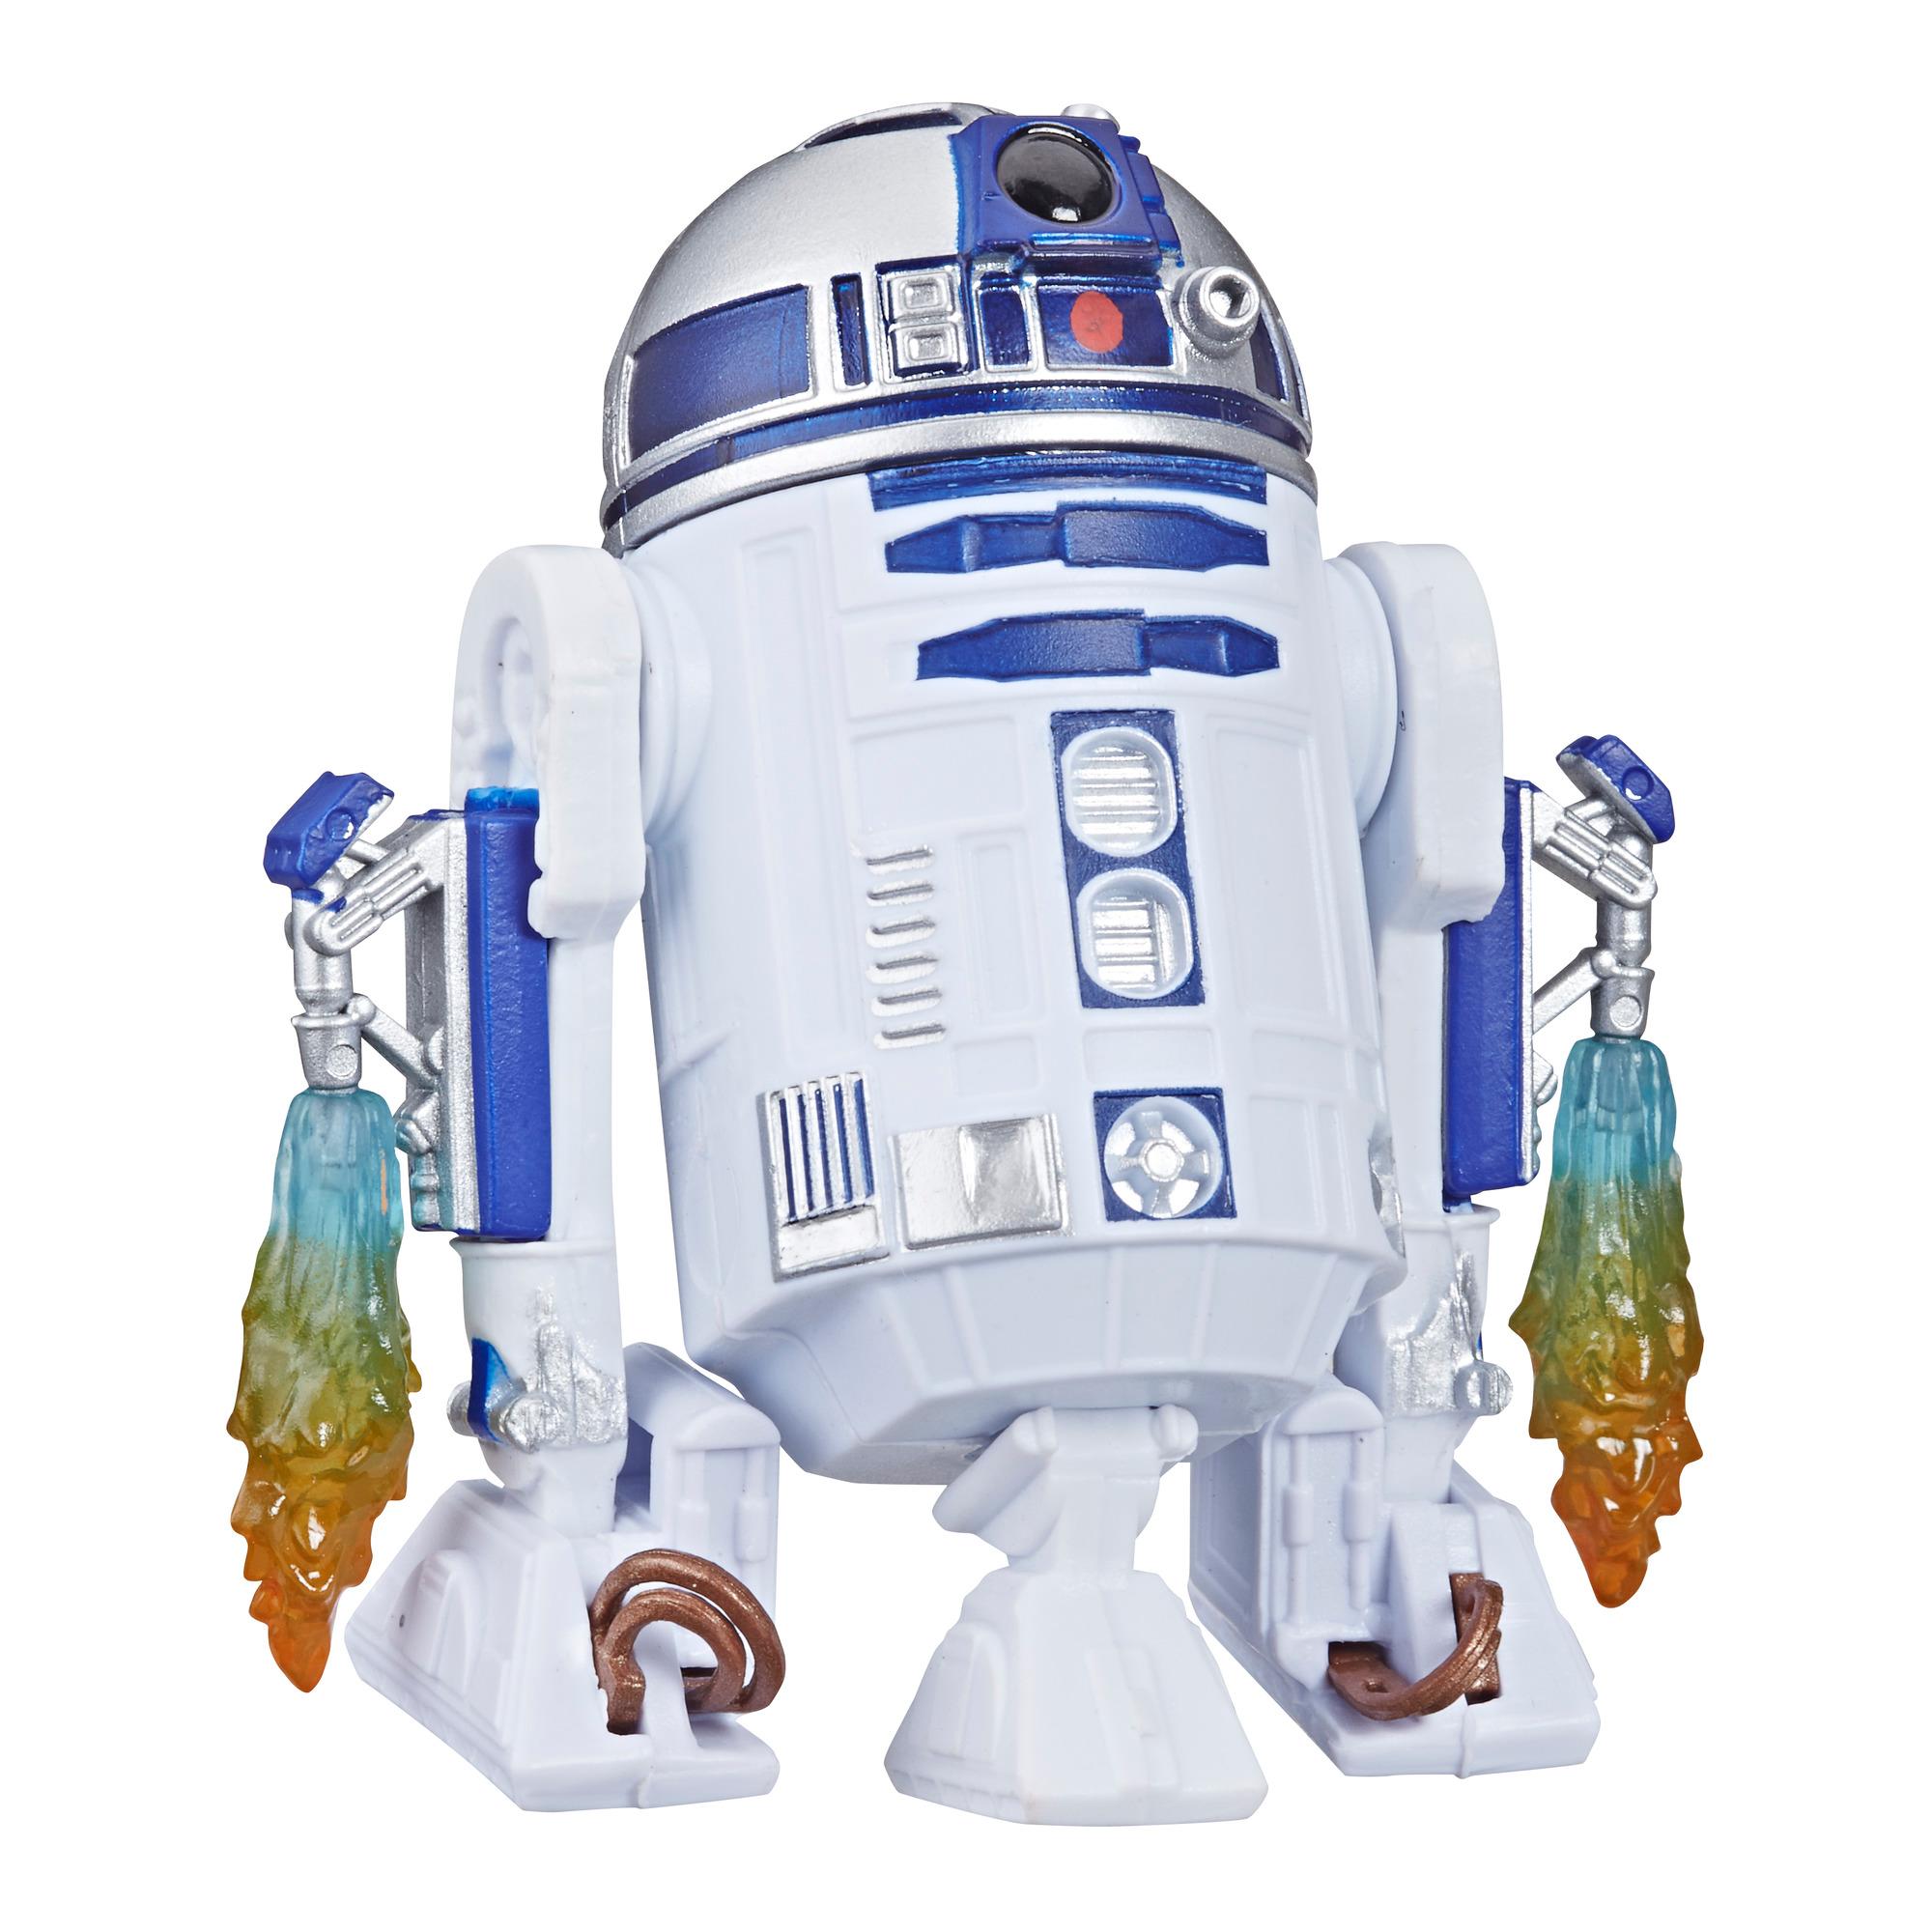 Hasbro Star Wars Galaxy of Adventures R2-D2 Action Figure for sale online